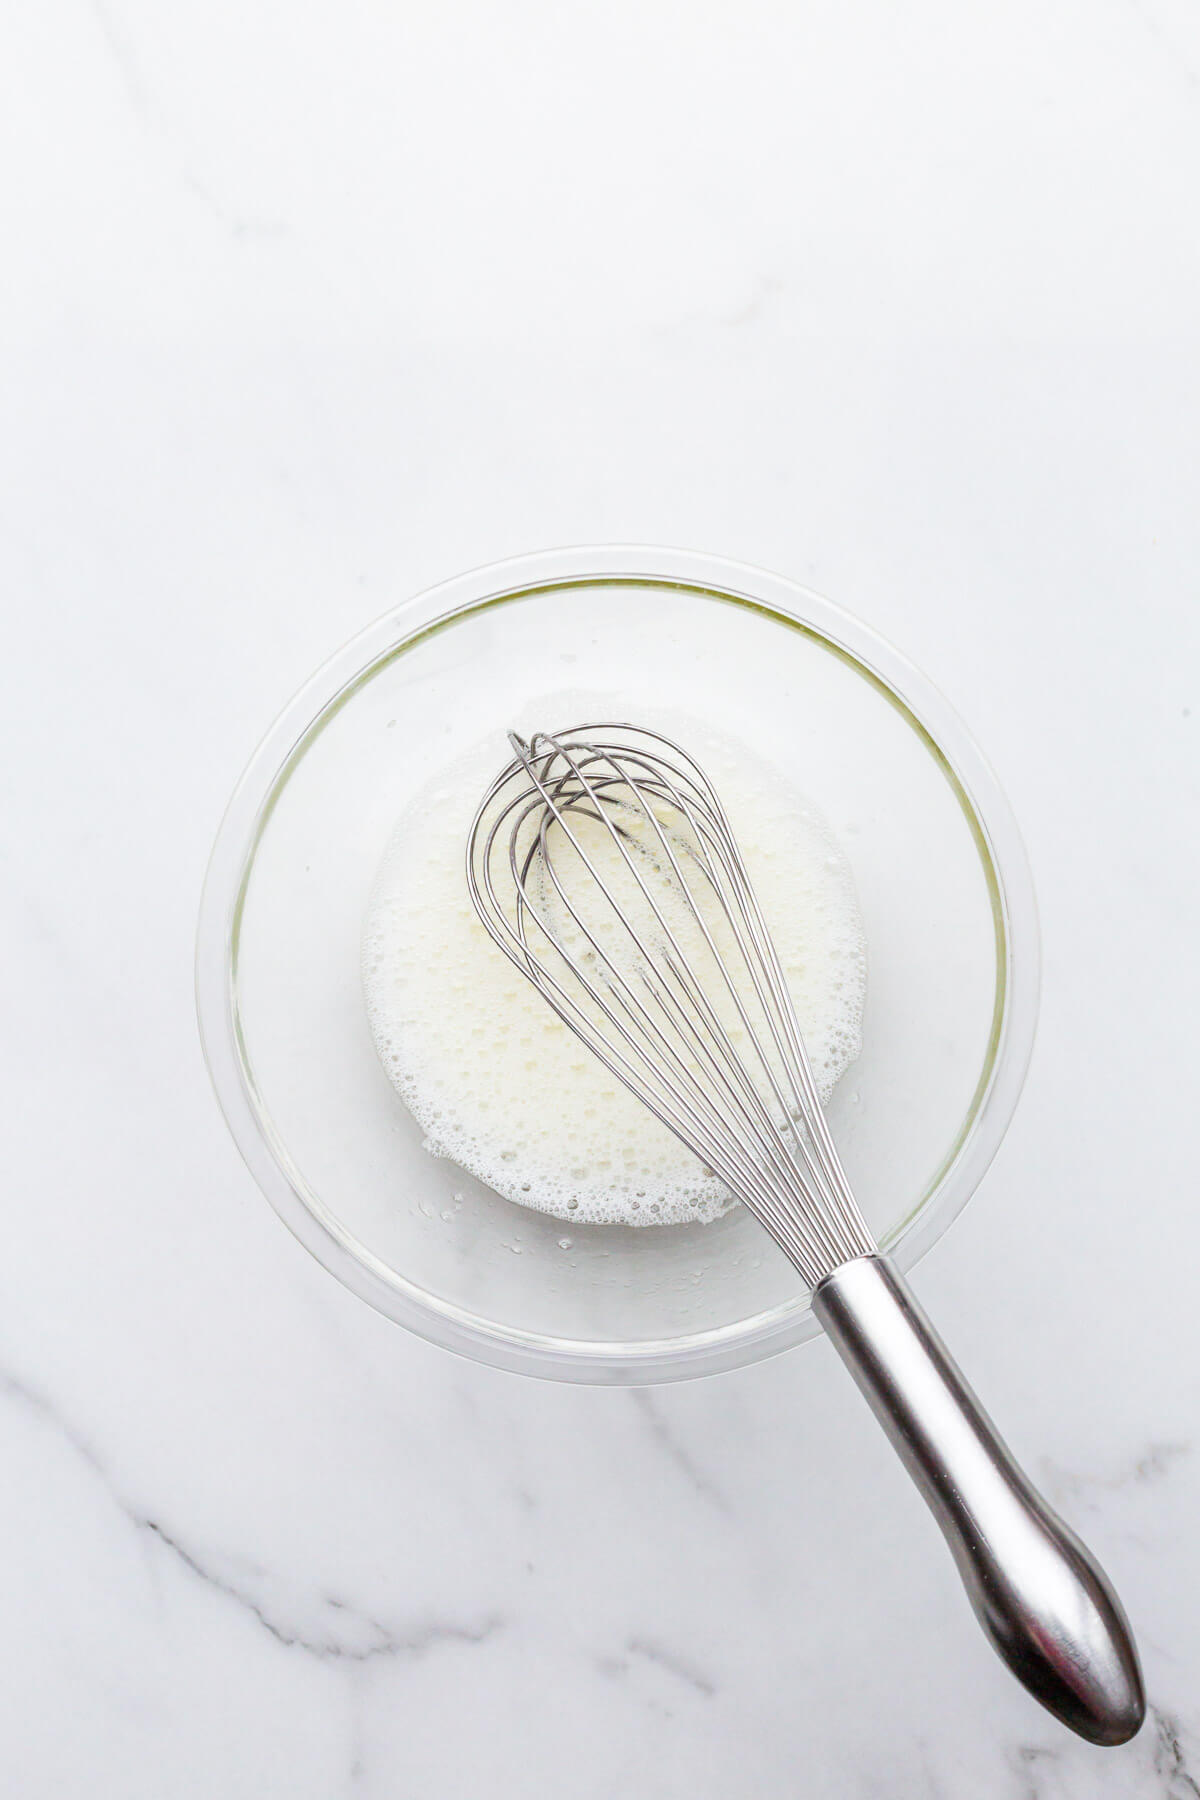 Whipping egg whites in a glass bowl until very frothy and foamy.